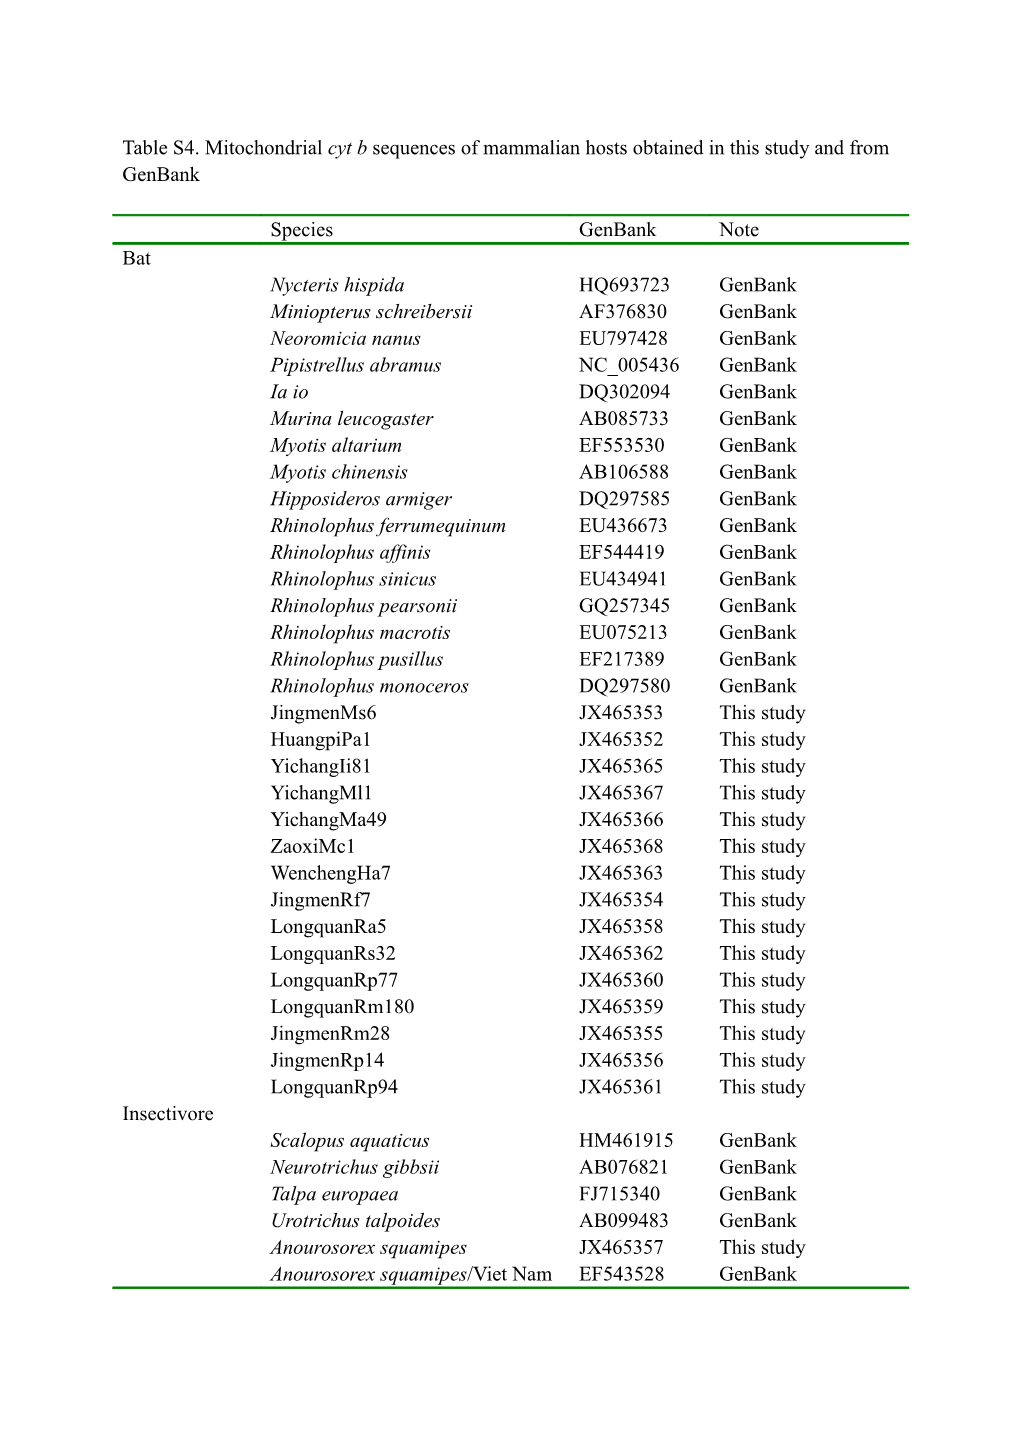 Table S4. Mitochondrial Cyt B Sequences of Mammalian Hosts Obtained in This Study and From